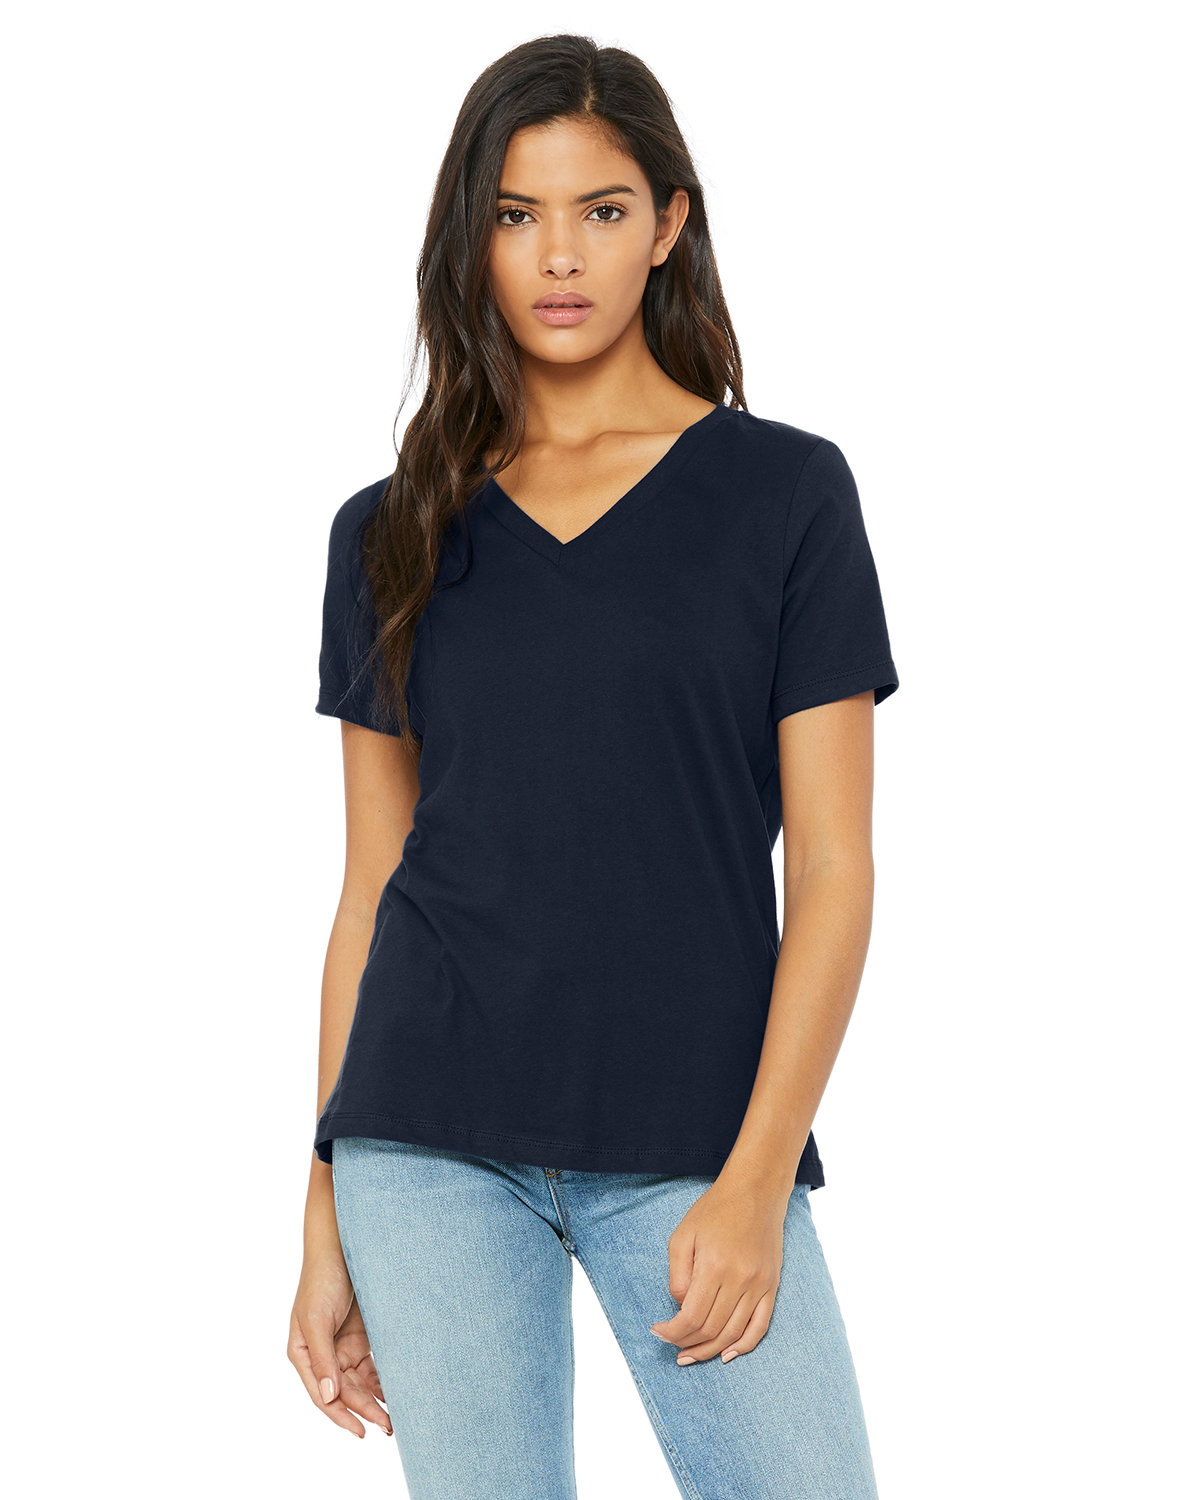 A007 6405 Bella Ladies  Relaxed Jersey V-Neck T-Shirt